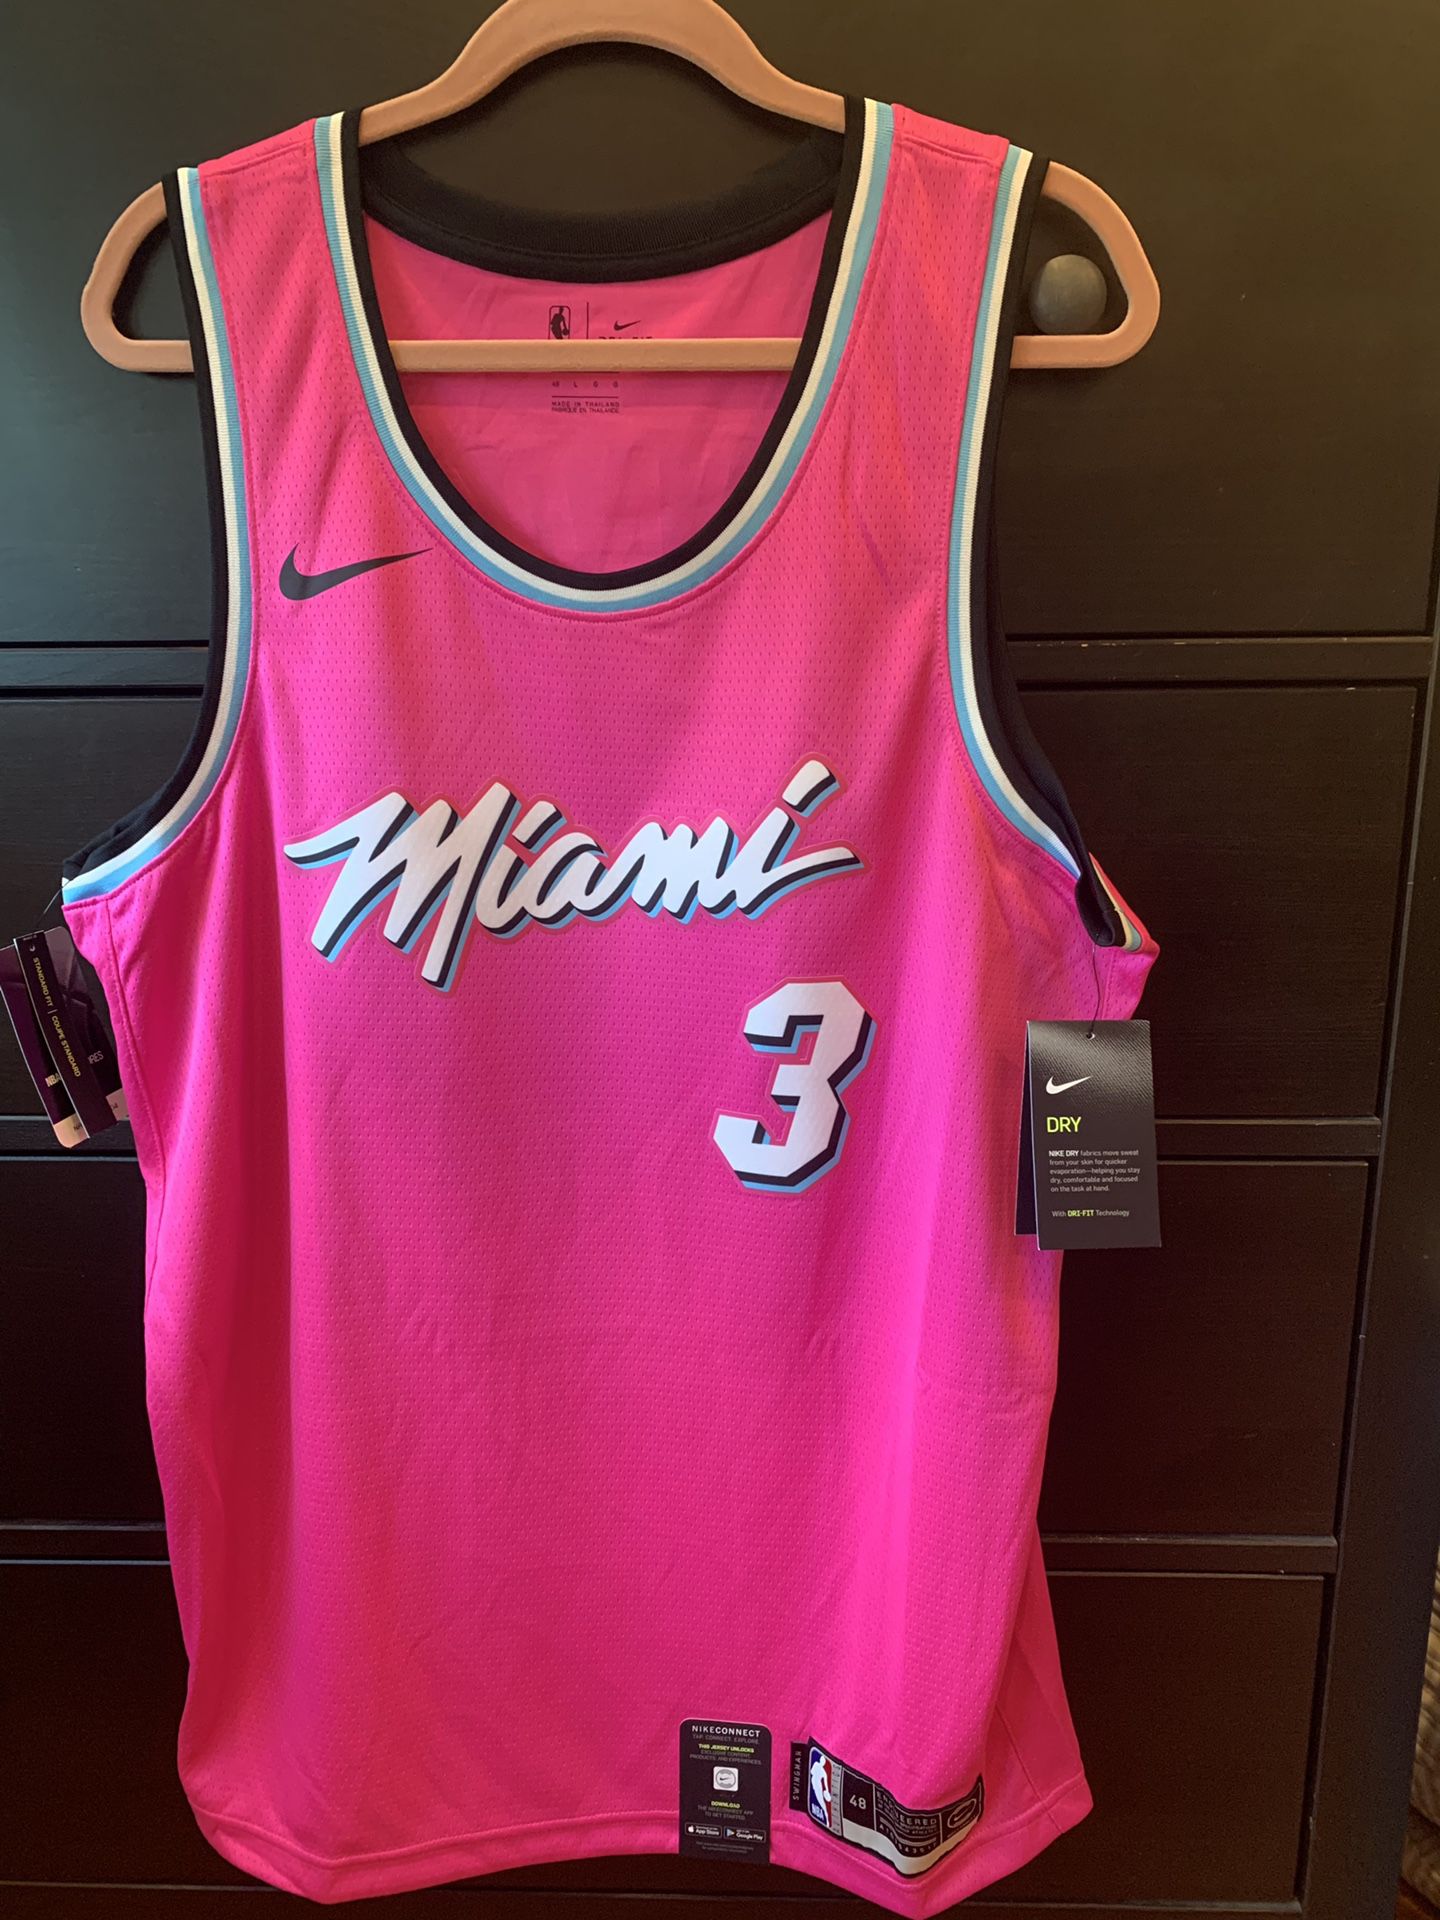 New Miami Heat Vice Limited Edition Nike Shirts for Sale in Cooper City, FL  - OfferUp